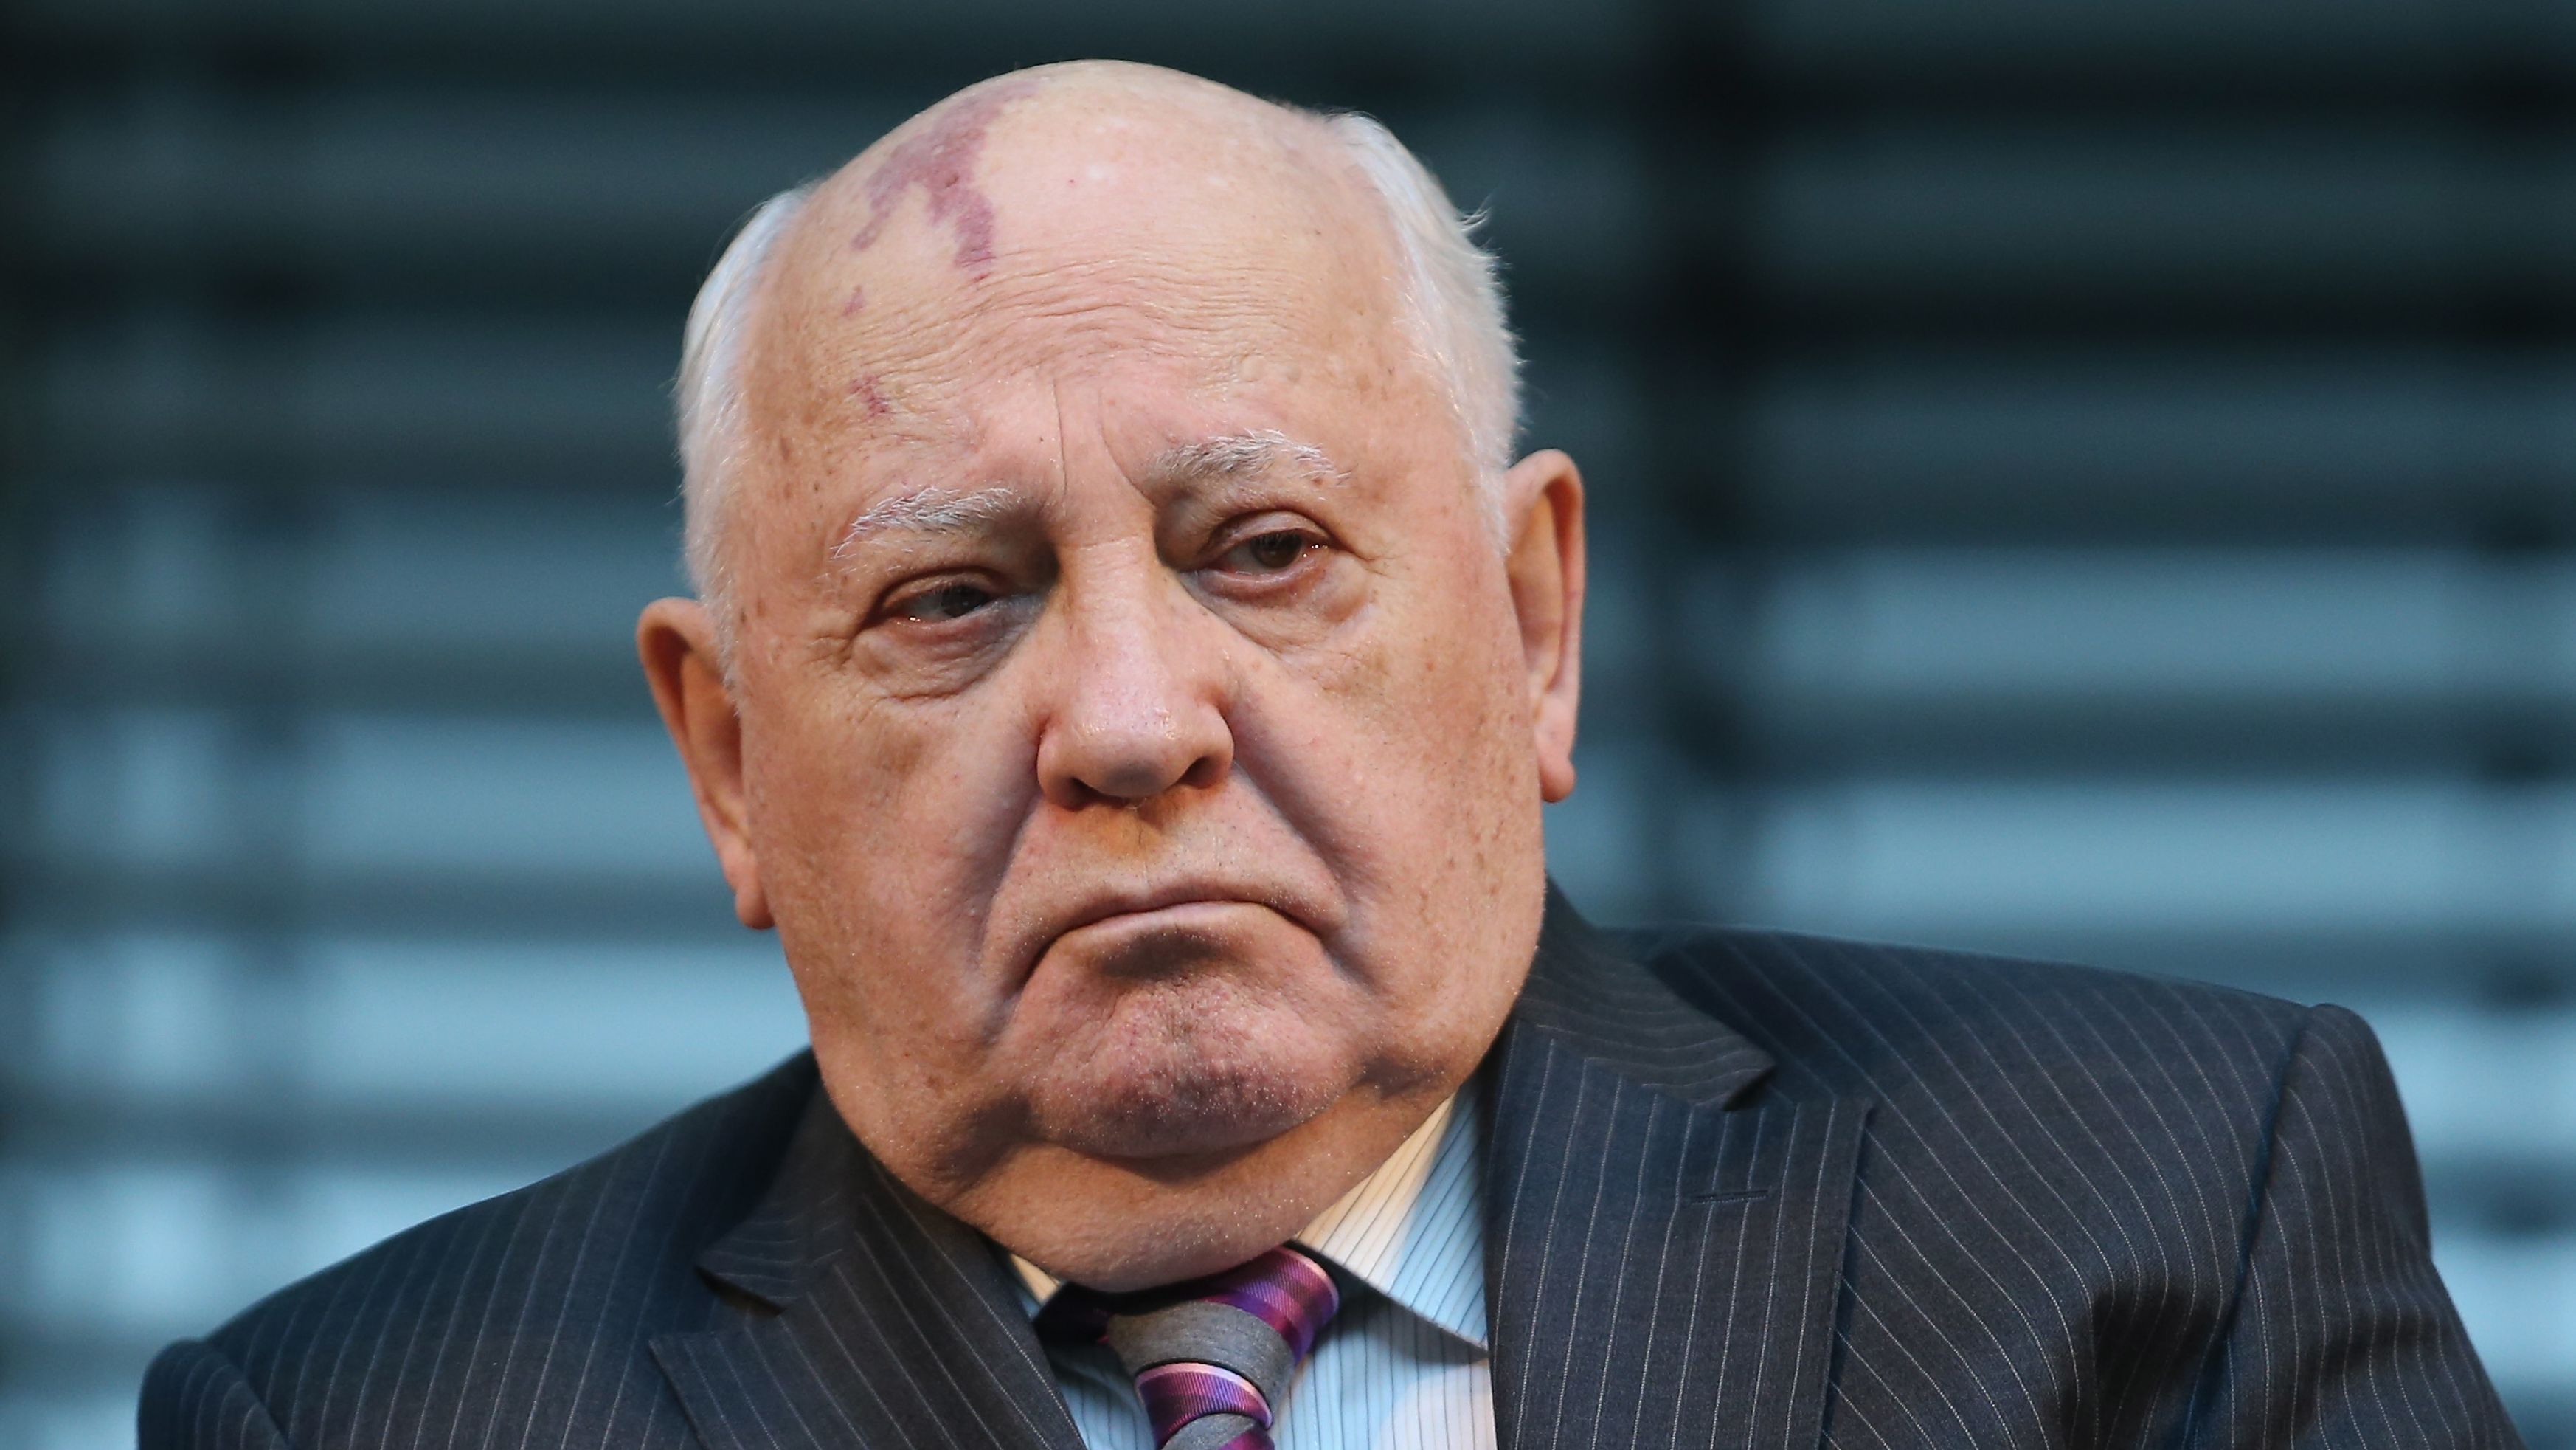 Ex-Soviet leader Mikhail Gorbachev told The Sunday Times magazine he supported Russia's annexation of Crimea.